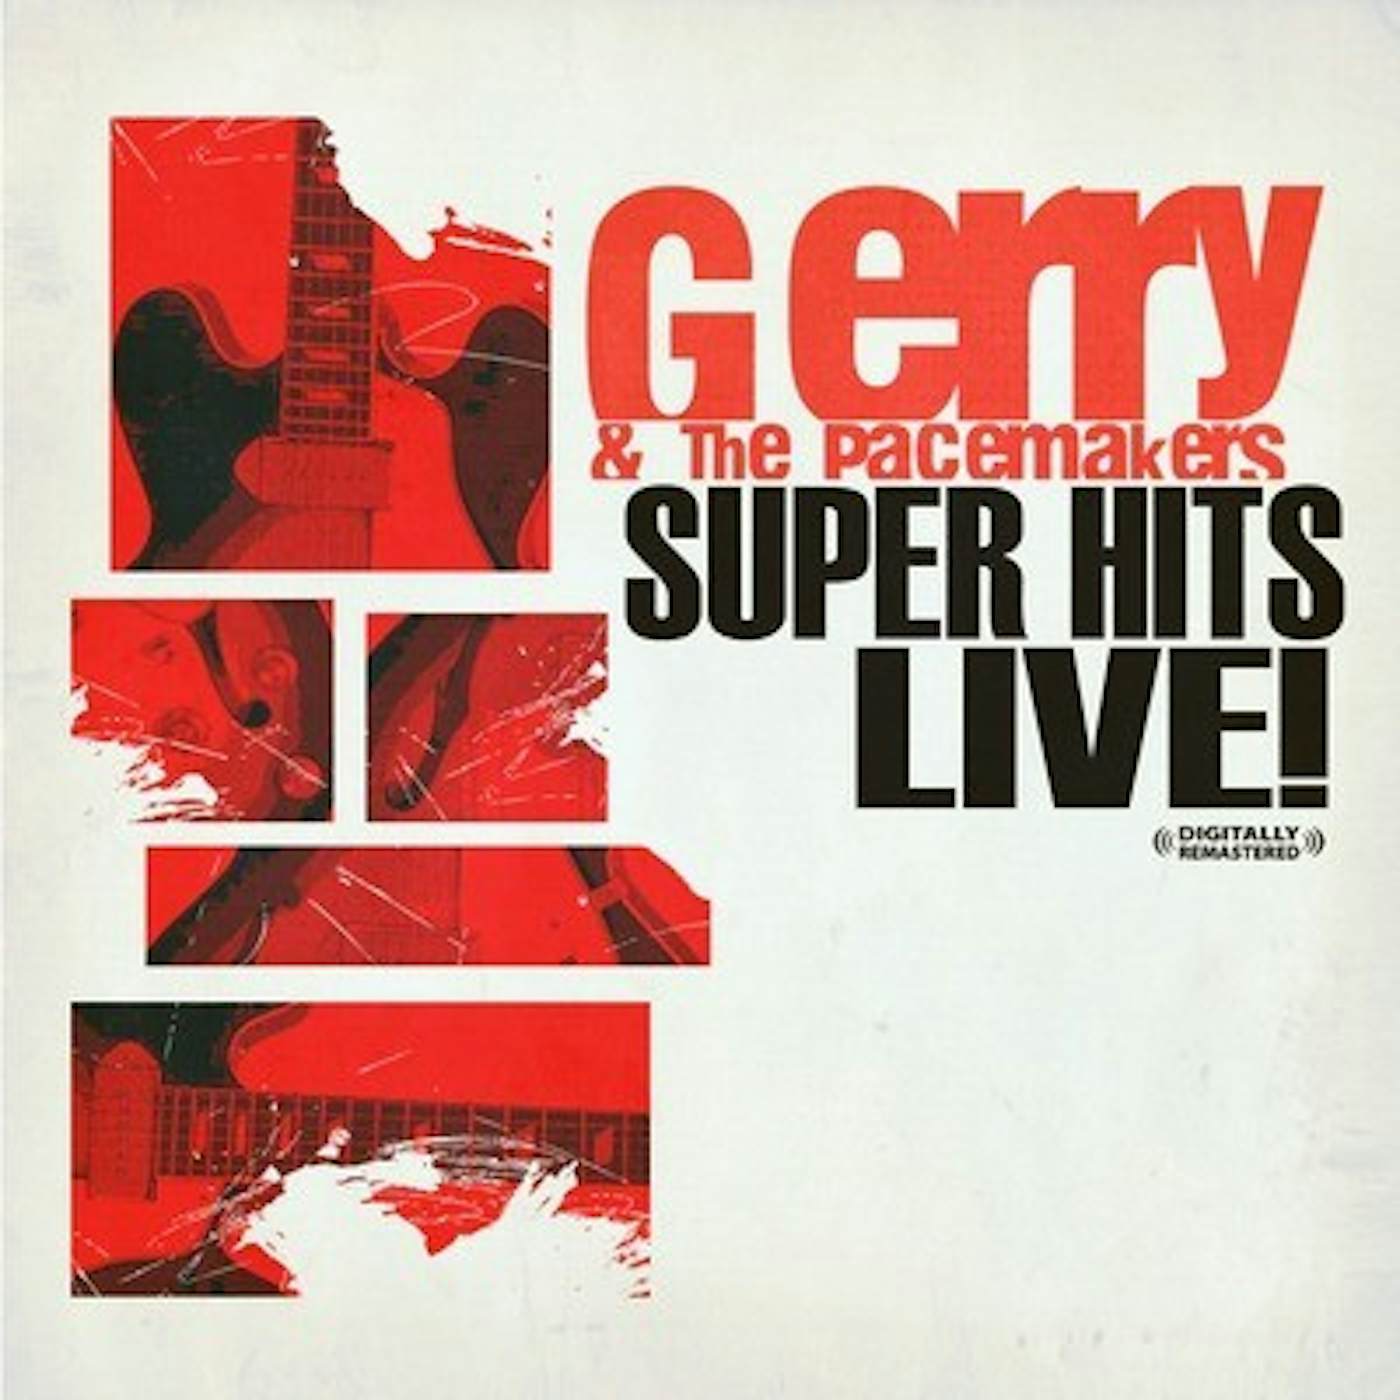 Gerry & The Pacemakers SUPER HITS LIVE CD